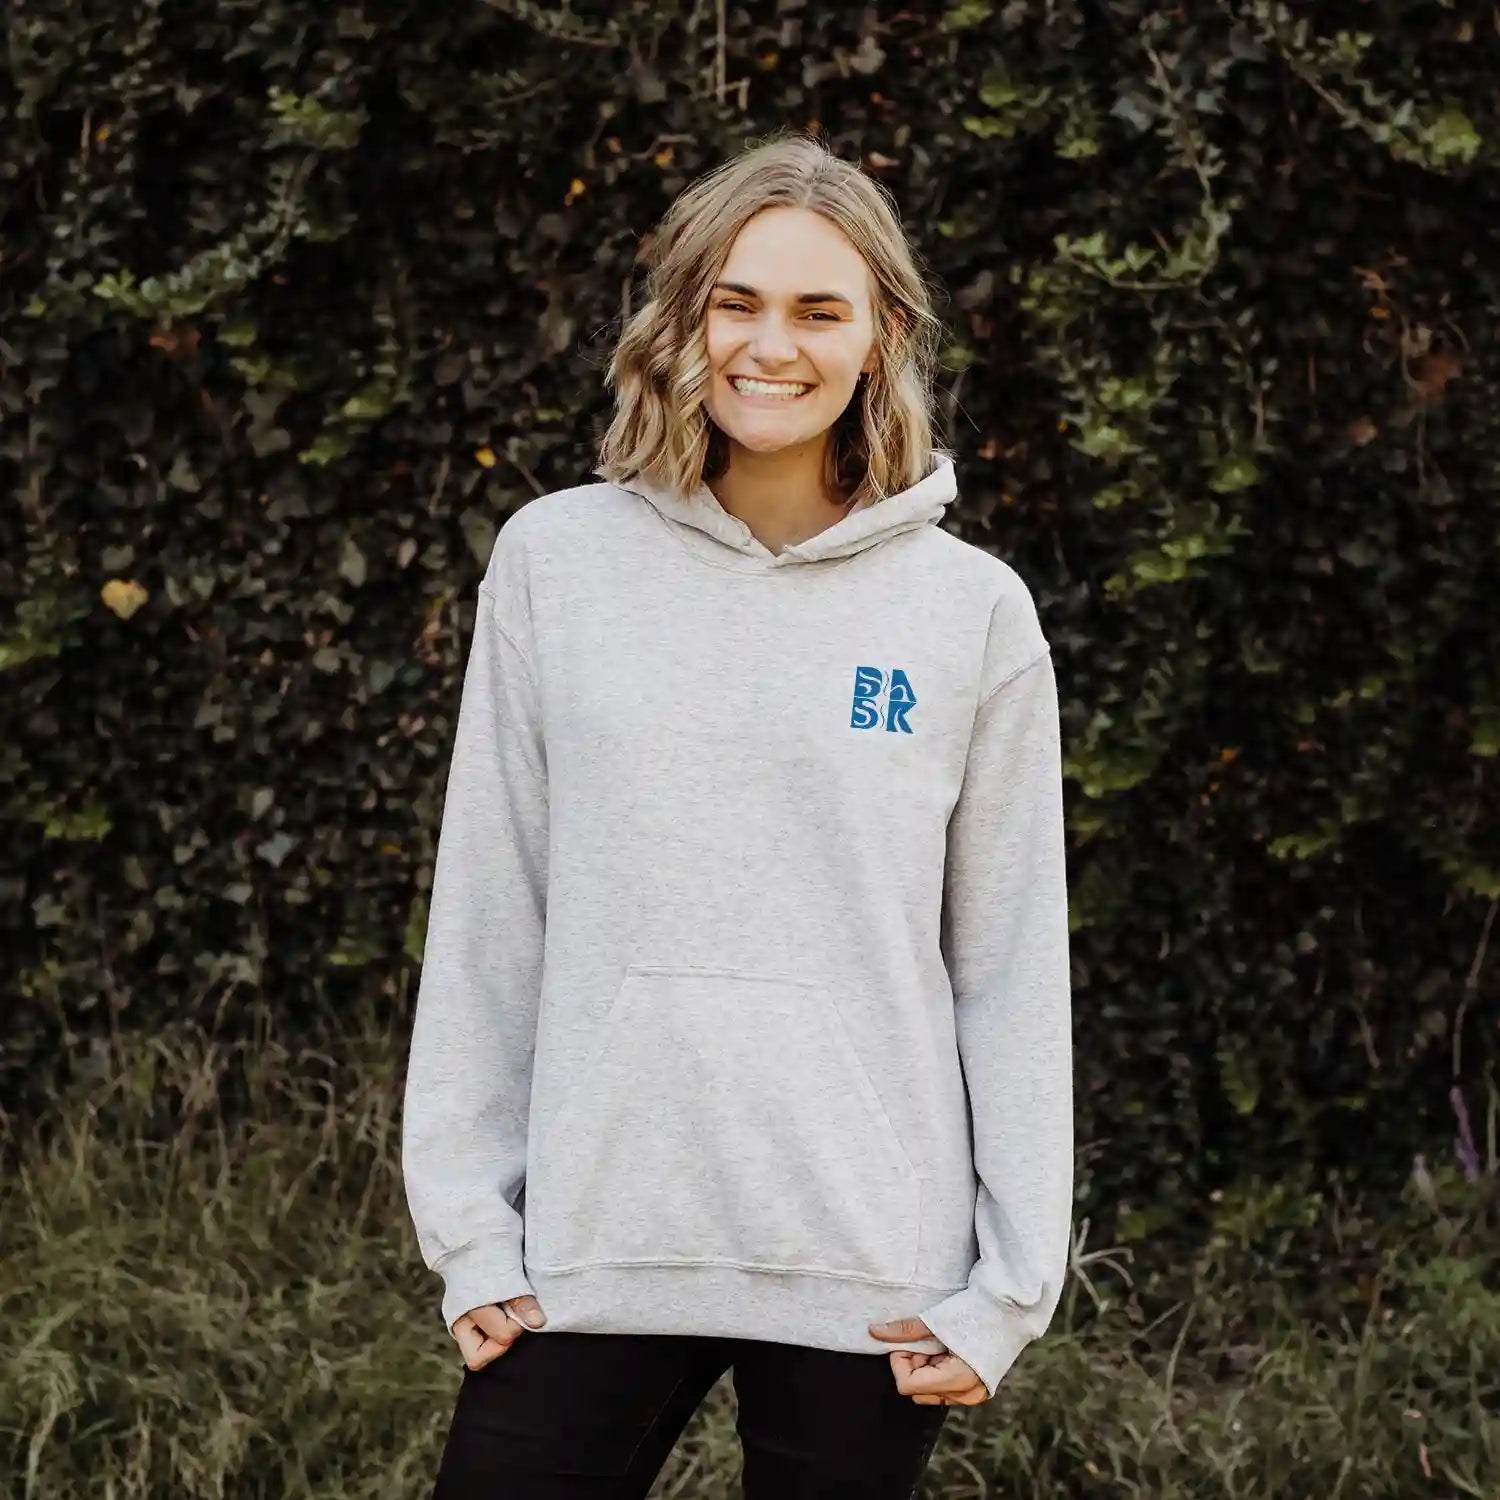 A woman wearing a Kupa'a Tide Hoodie by Be Still and Know.